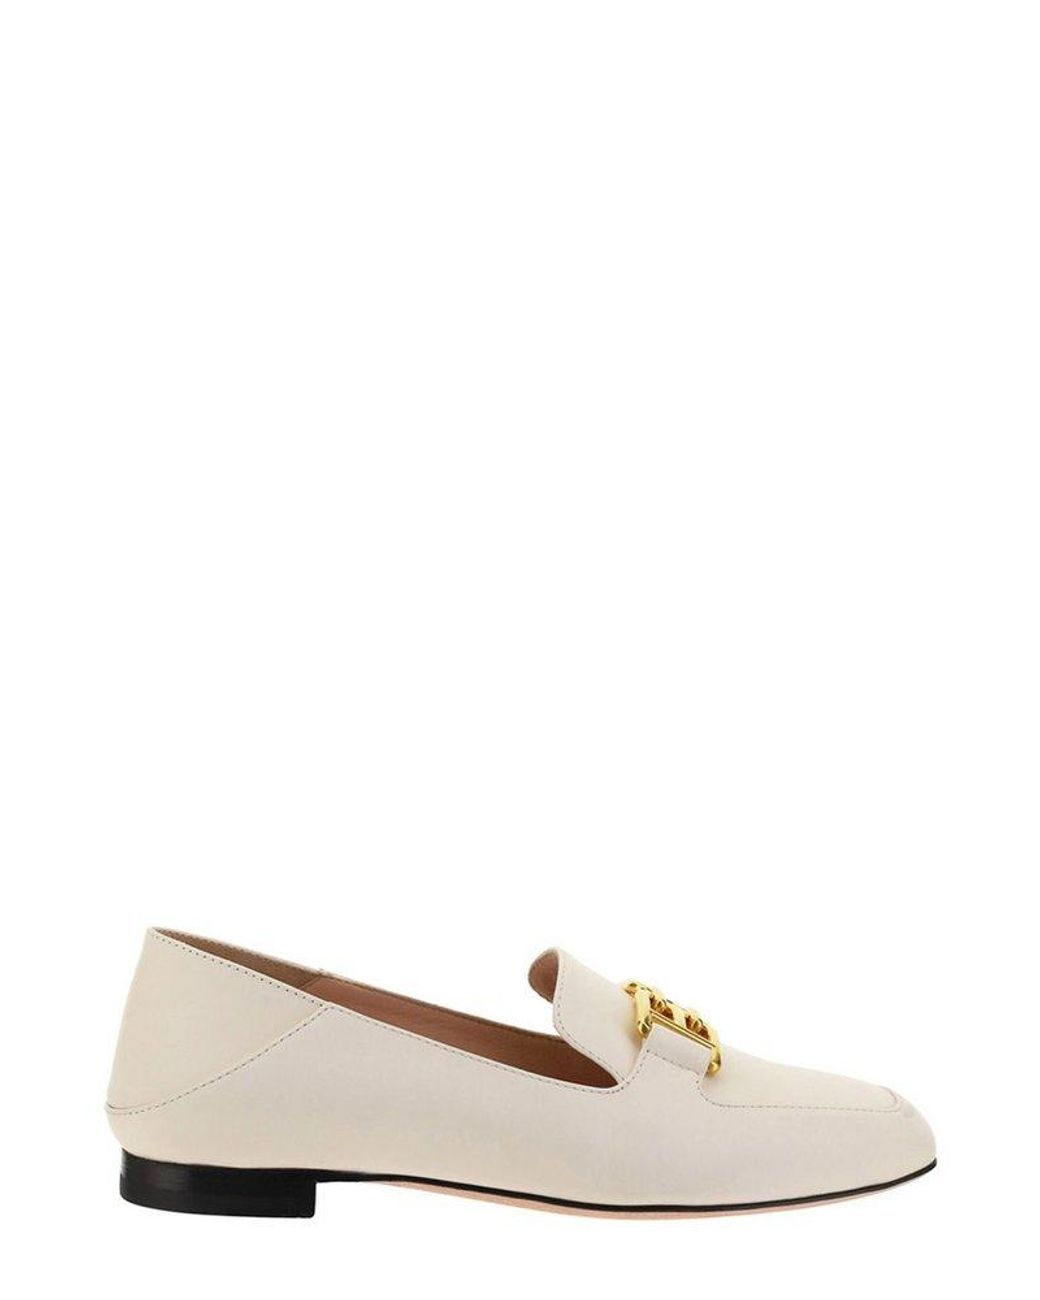 Bally Ellah B Logo Plaque Square-toe Loafers in White | Lyst